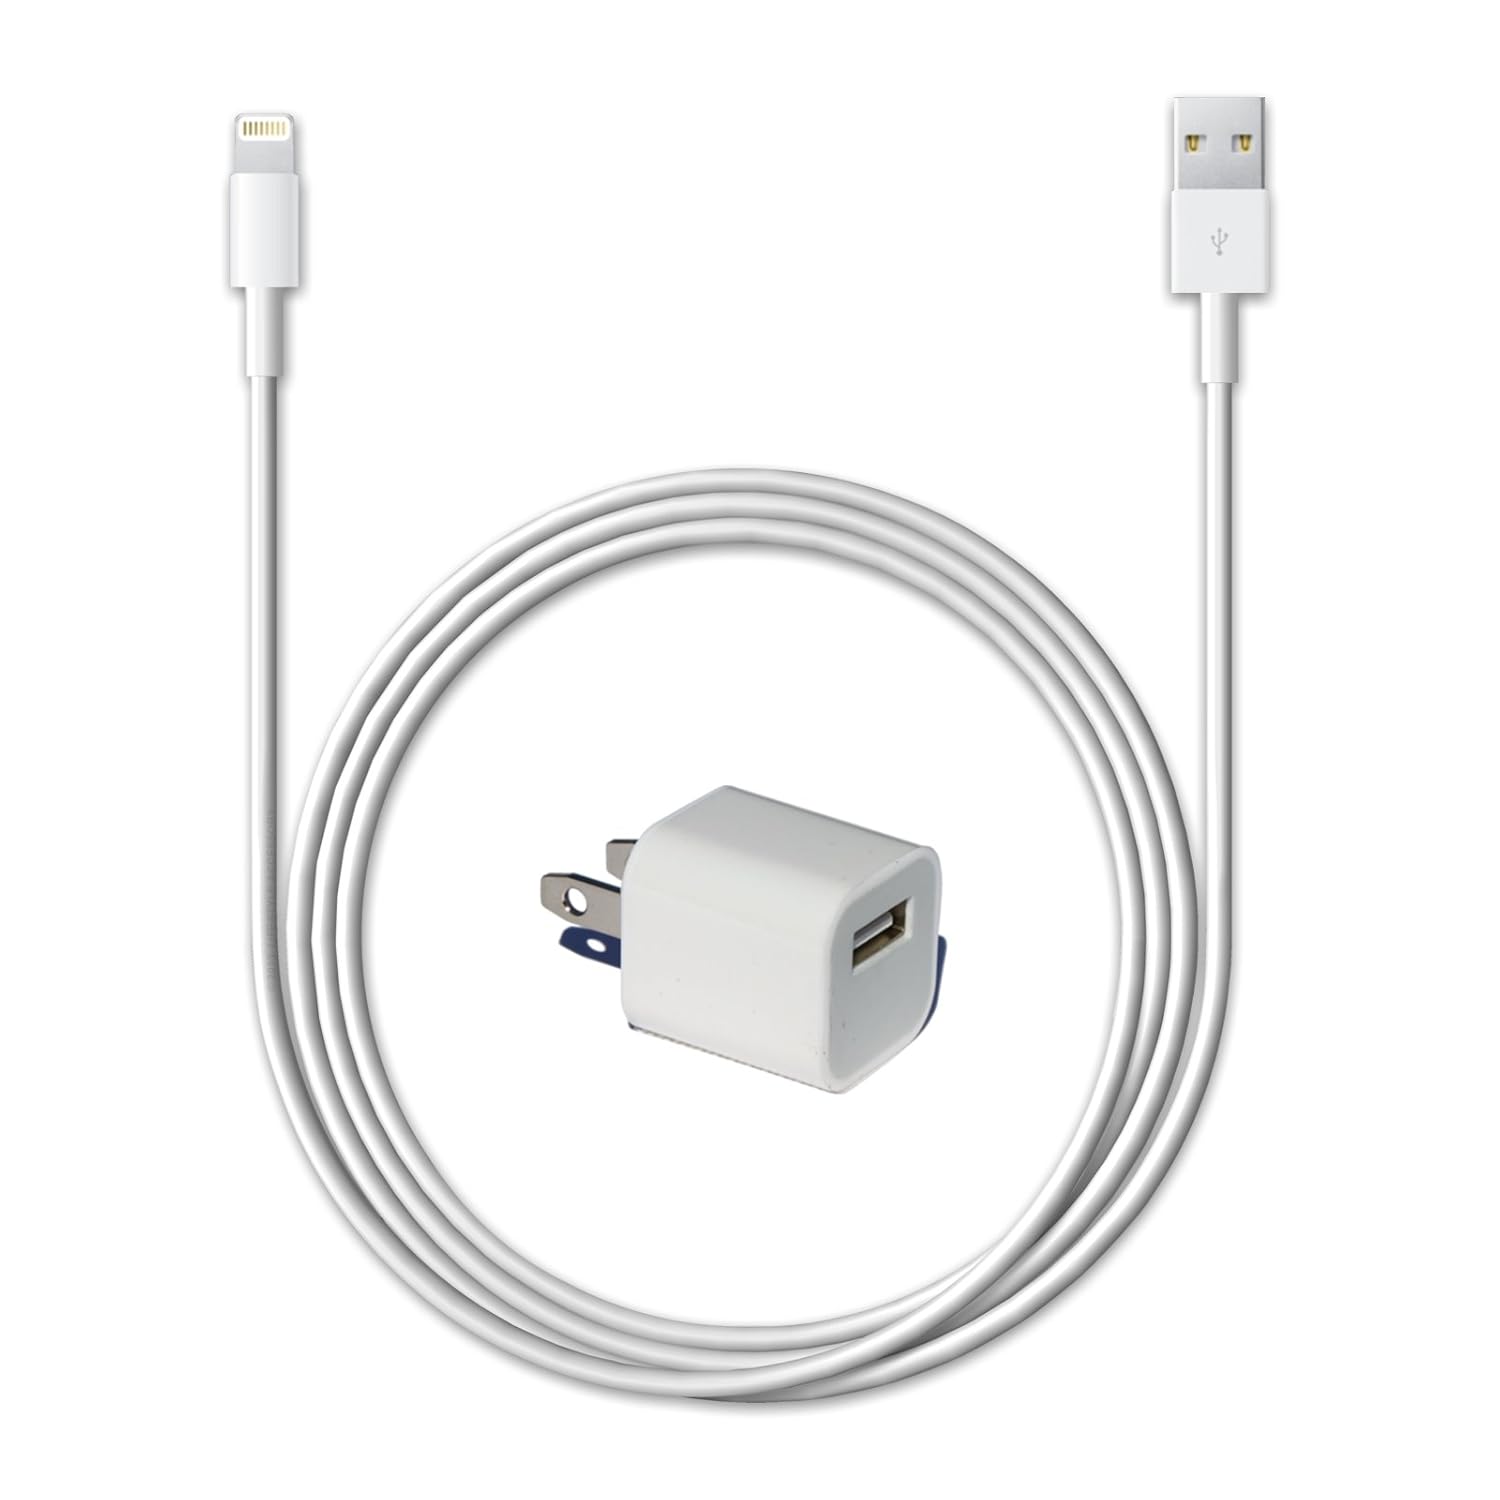 Iphone 5 Charger Adapter Best Buy